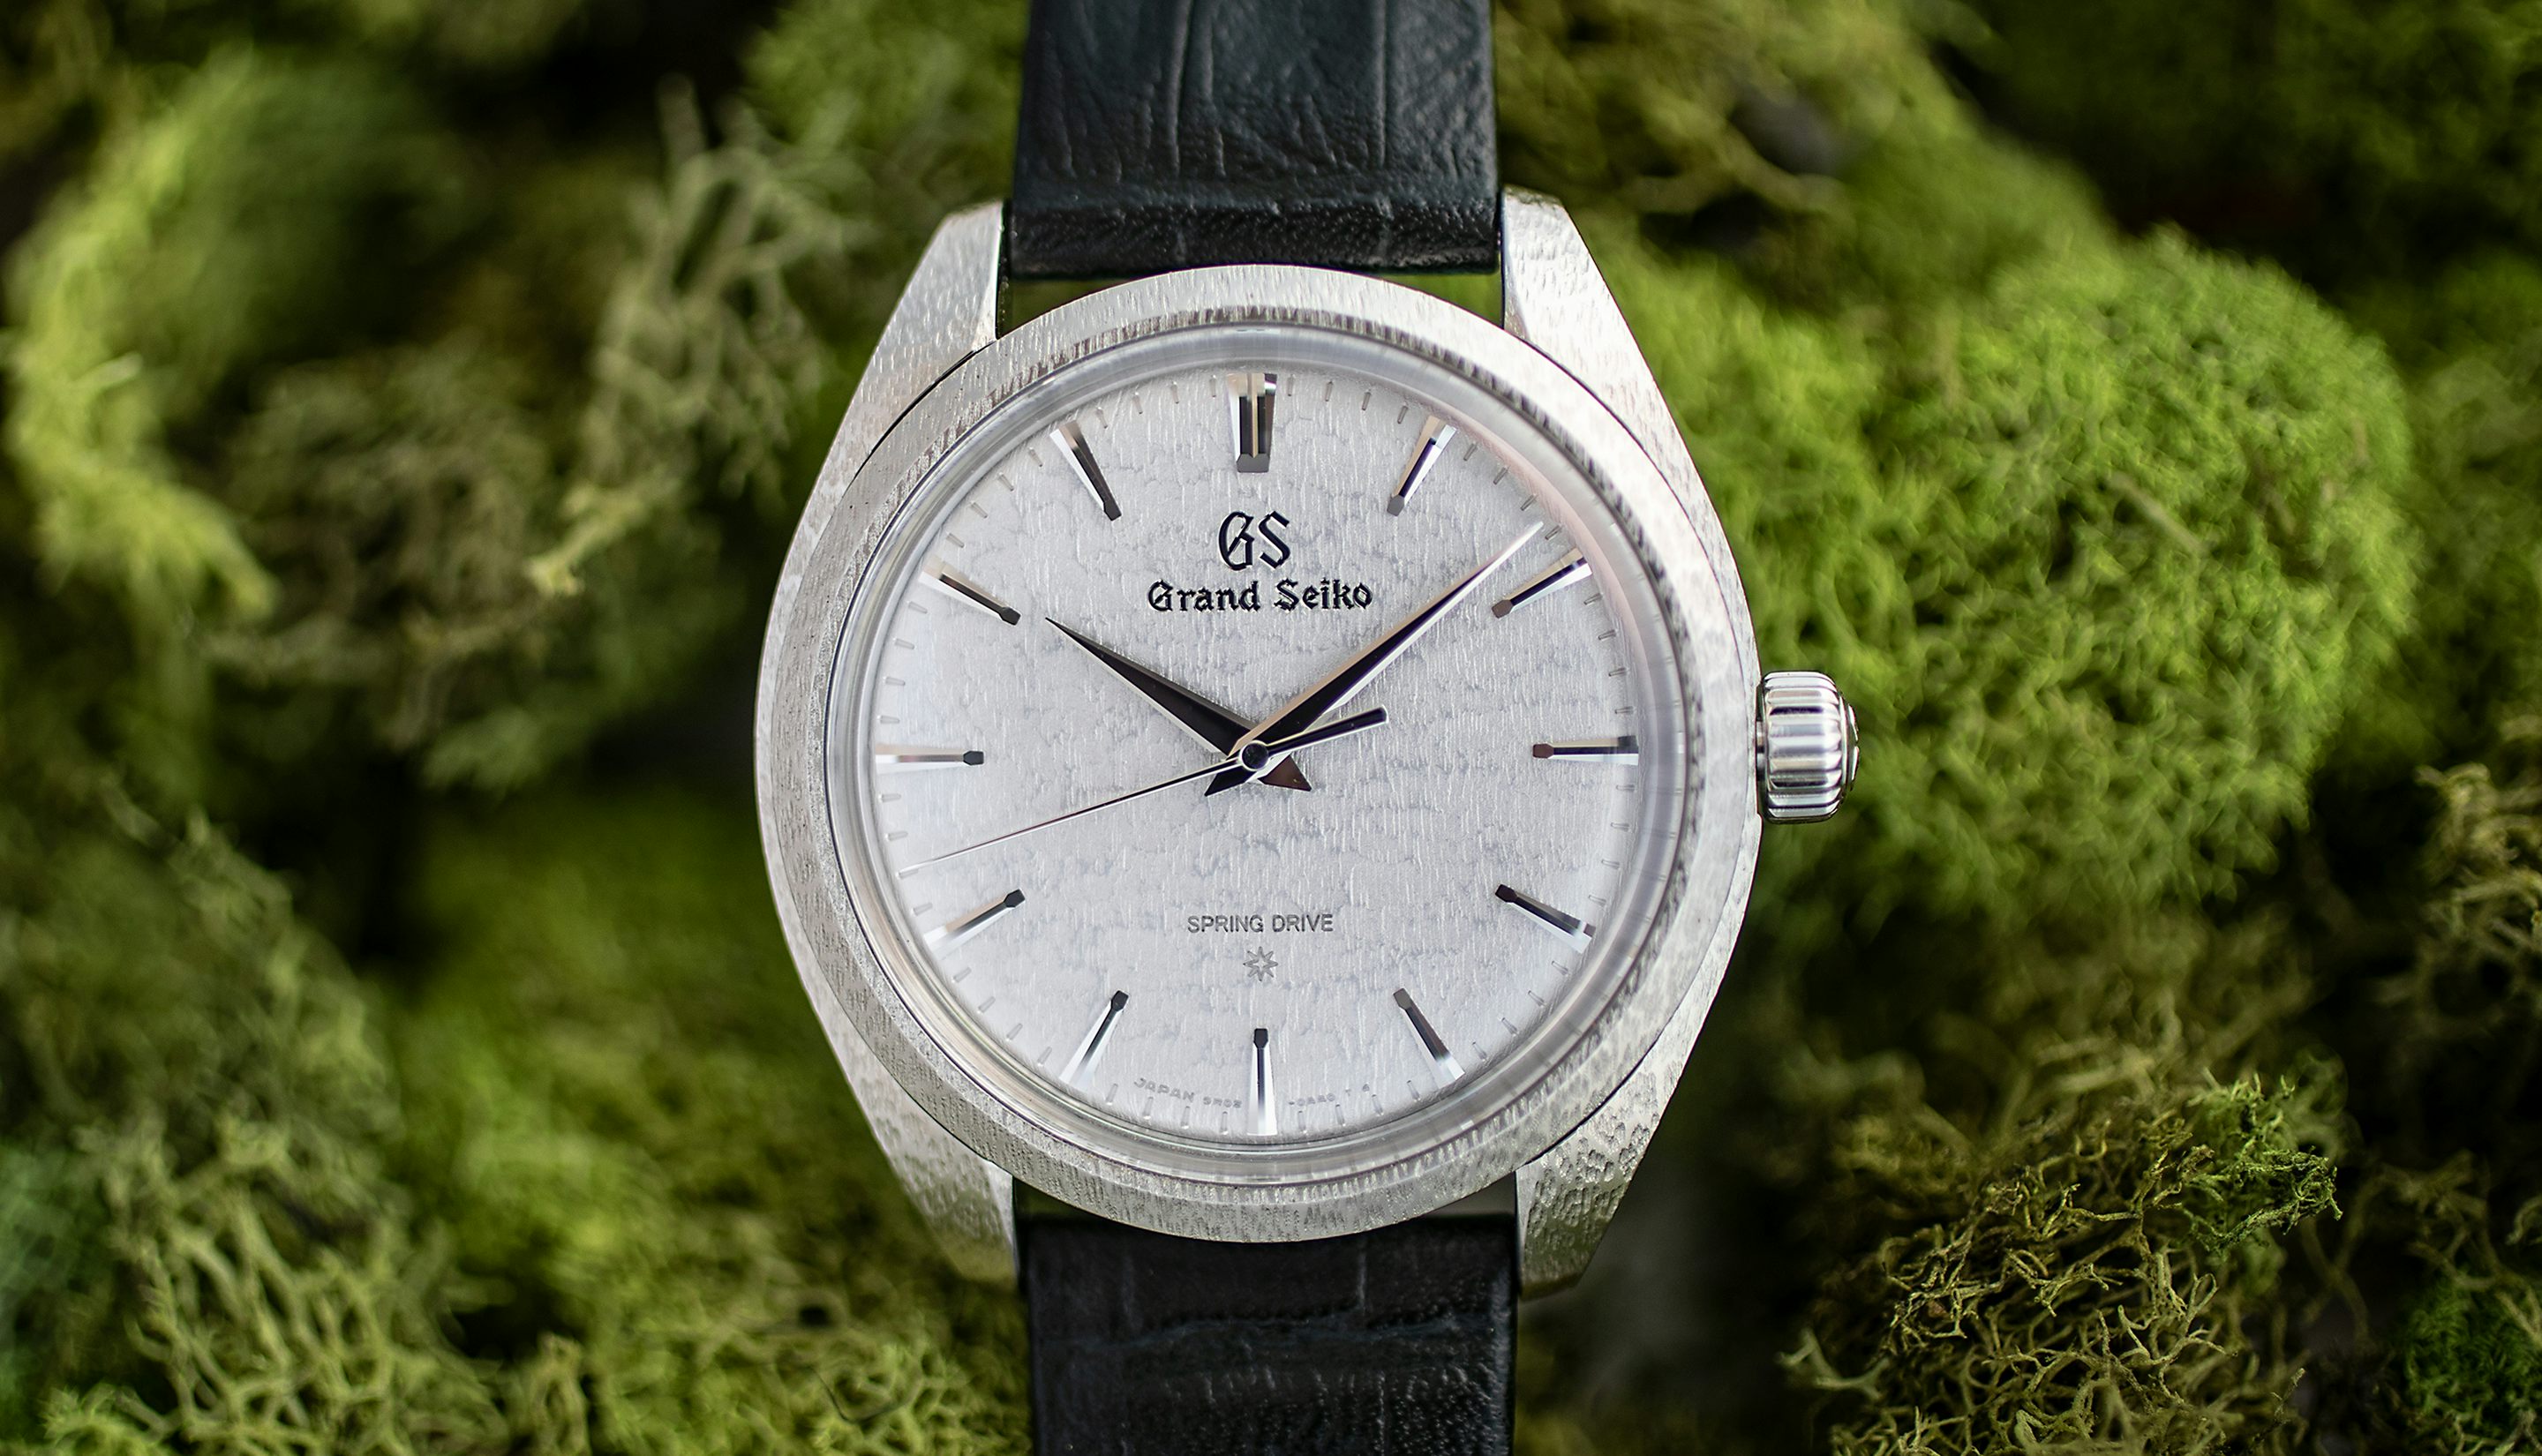 Introducing: The Grand Seiko 20th Anniversary Of Spring Drive (Live Pics Pricing) - Hodinkee